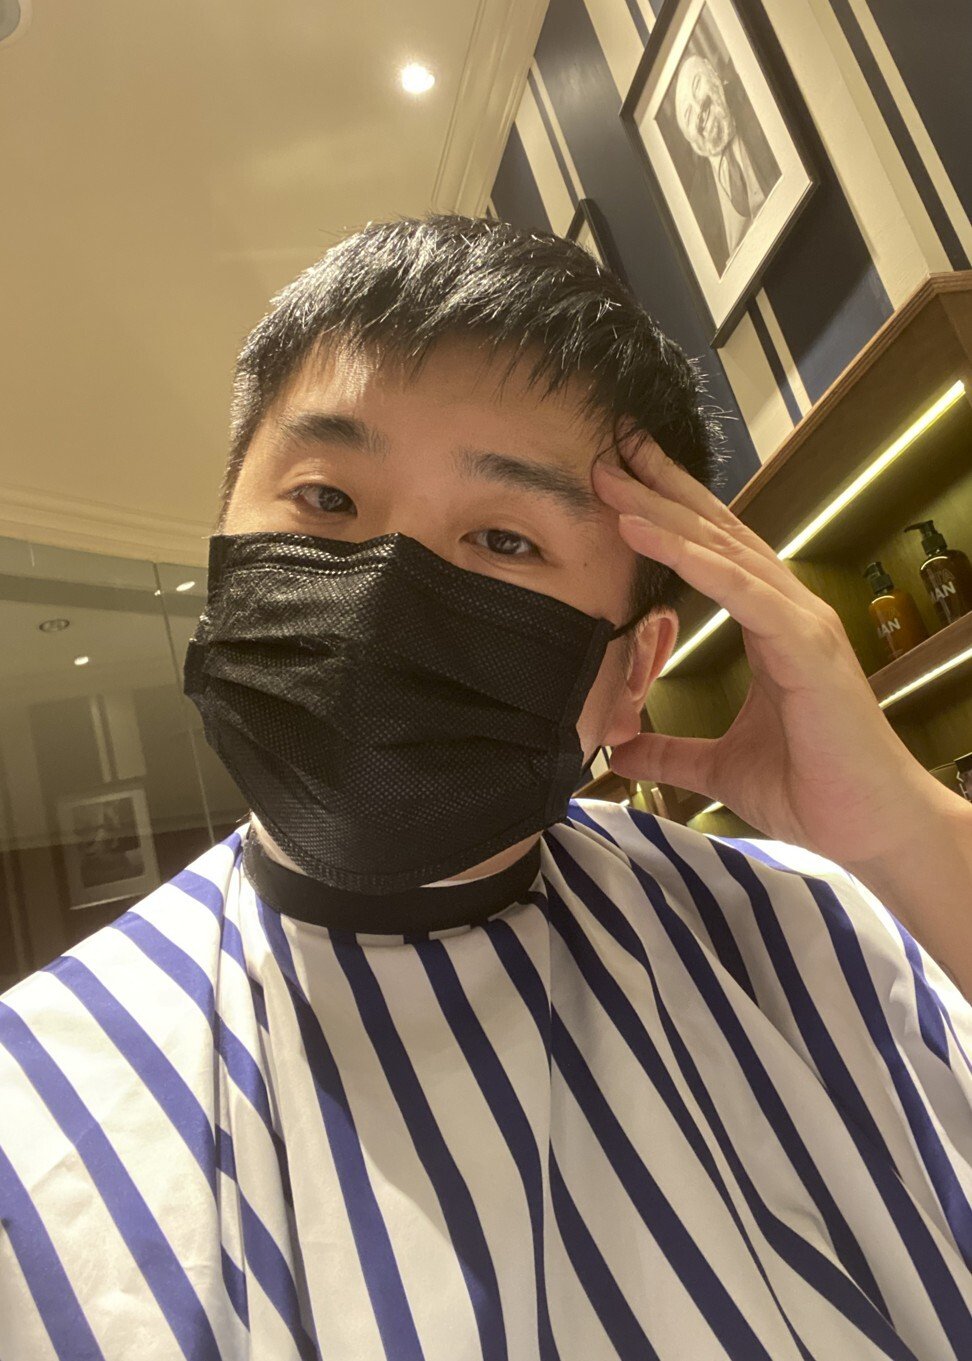 Chan got a celebratory haircut at a salon in the Kerry Hotel in Hong Kong on the day of his release from home quarantine. Photo: Declan Chan